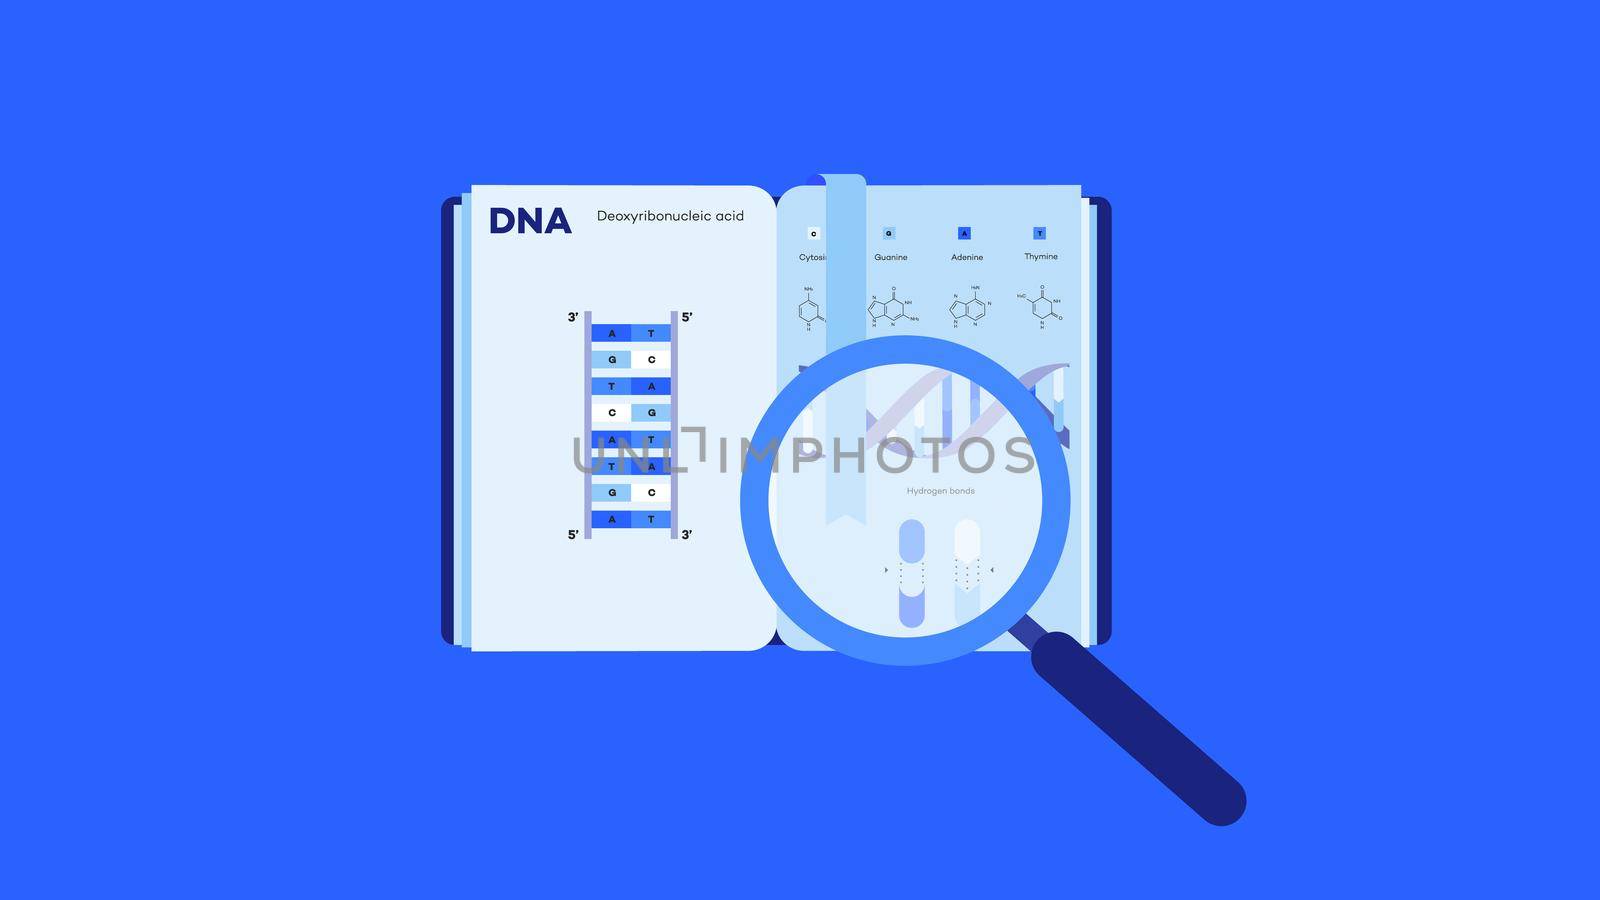 E-learning Conceptual Vector Illustration. Open Book With Infographic DNA structure And Magnifier On Blue Background.